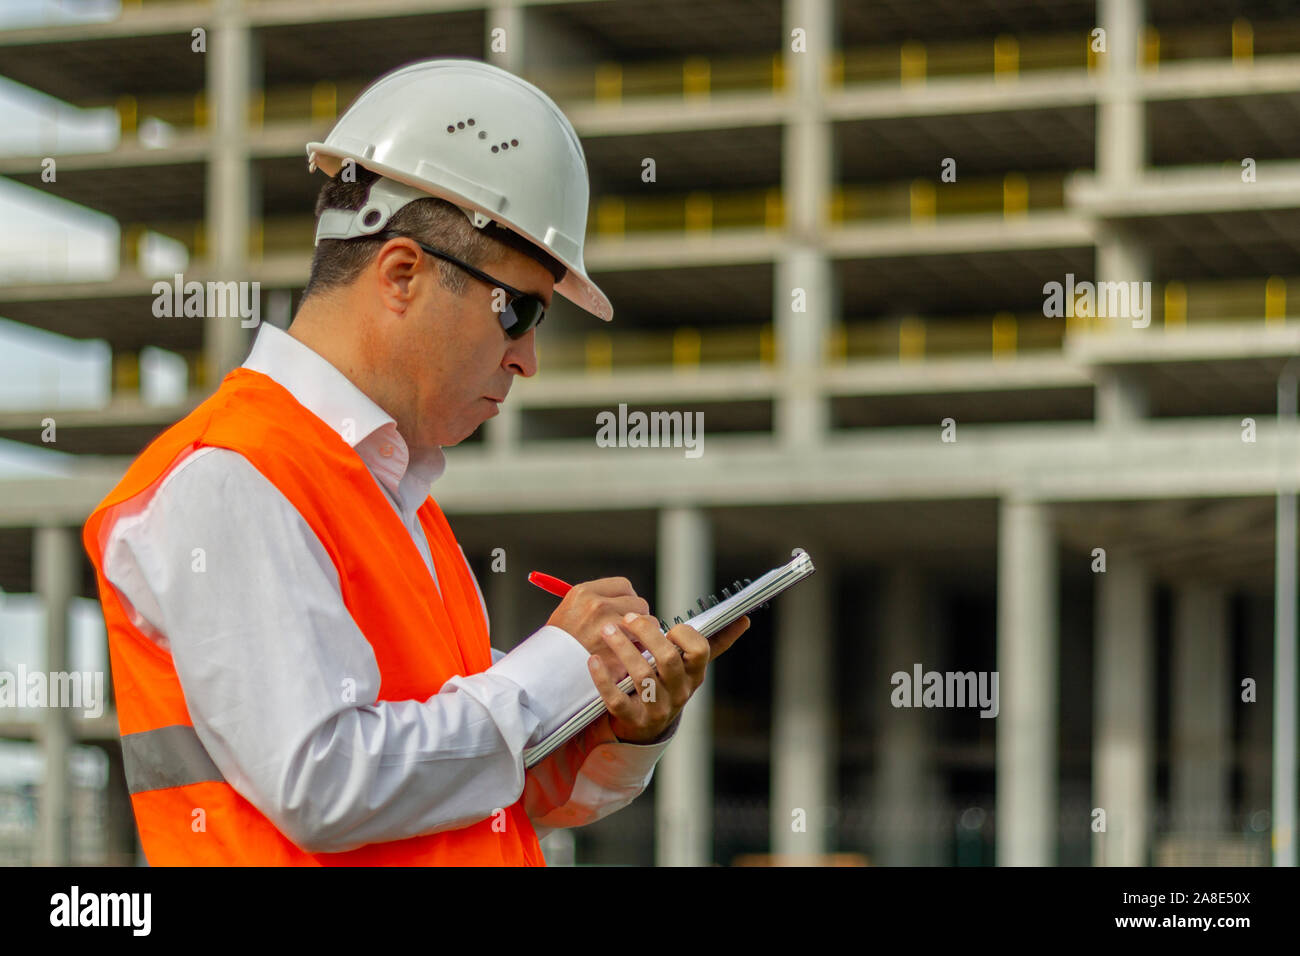 Construction engineer man in shirt and tie with safety helmet and vest works at construction site. Concept of people working in industrial field Stock Photo